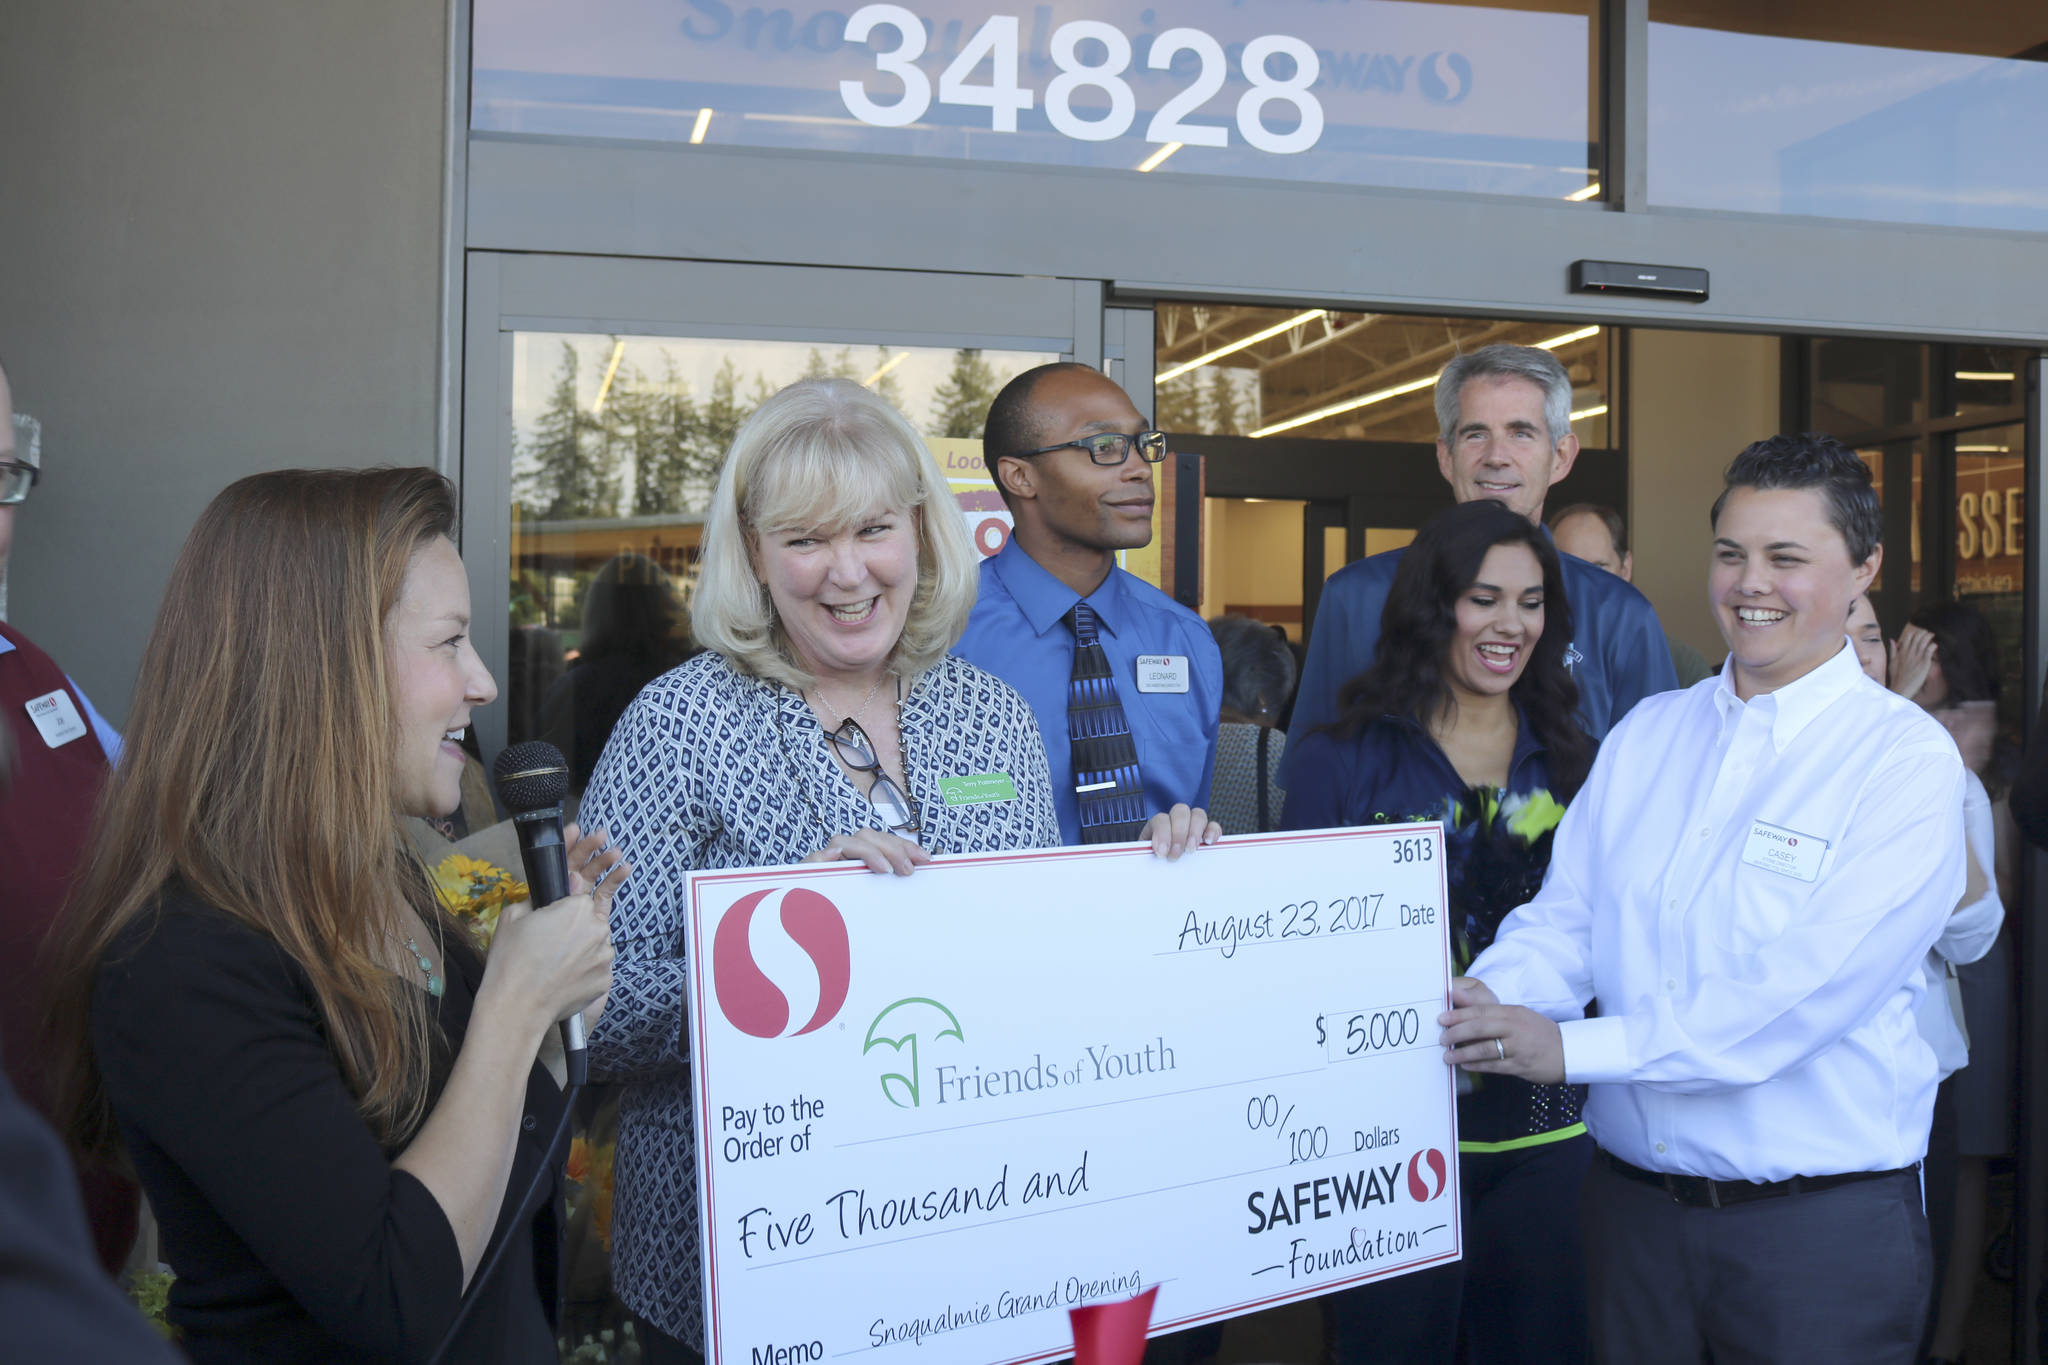 Terry Pottmeyer, CEO of Friends of Youth, receives a $5,000 donation from the Safeway Foundation at the grand opening event.                                (Evan Pappas/Staff Photo)